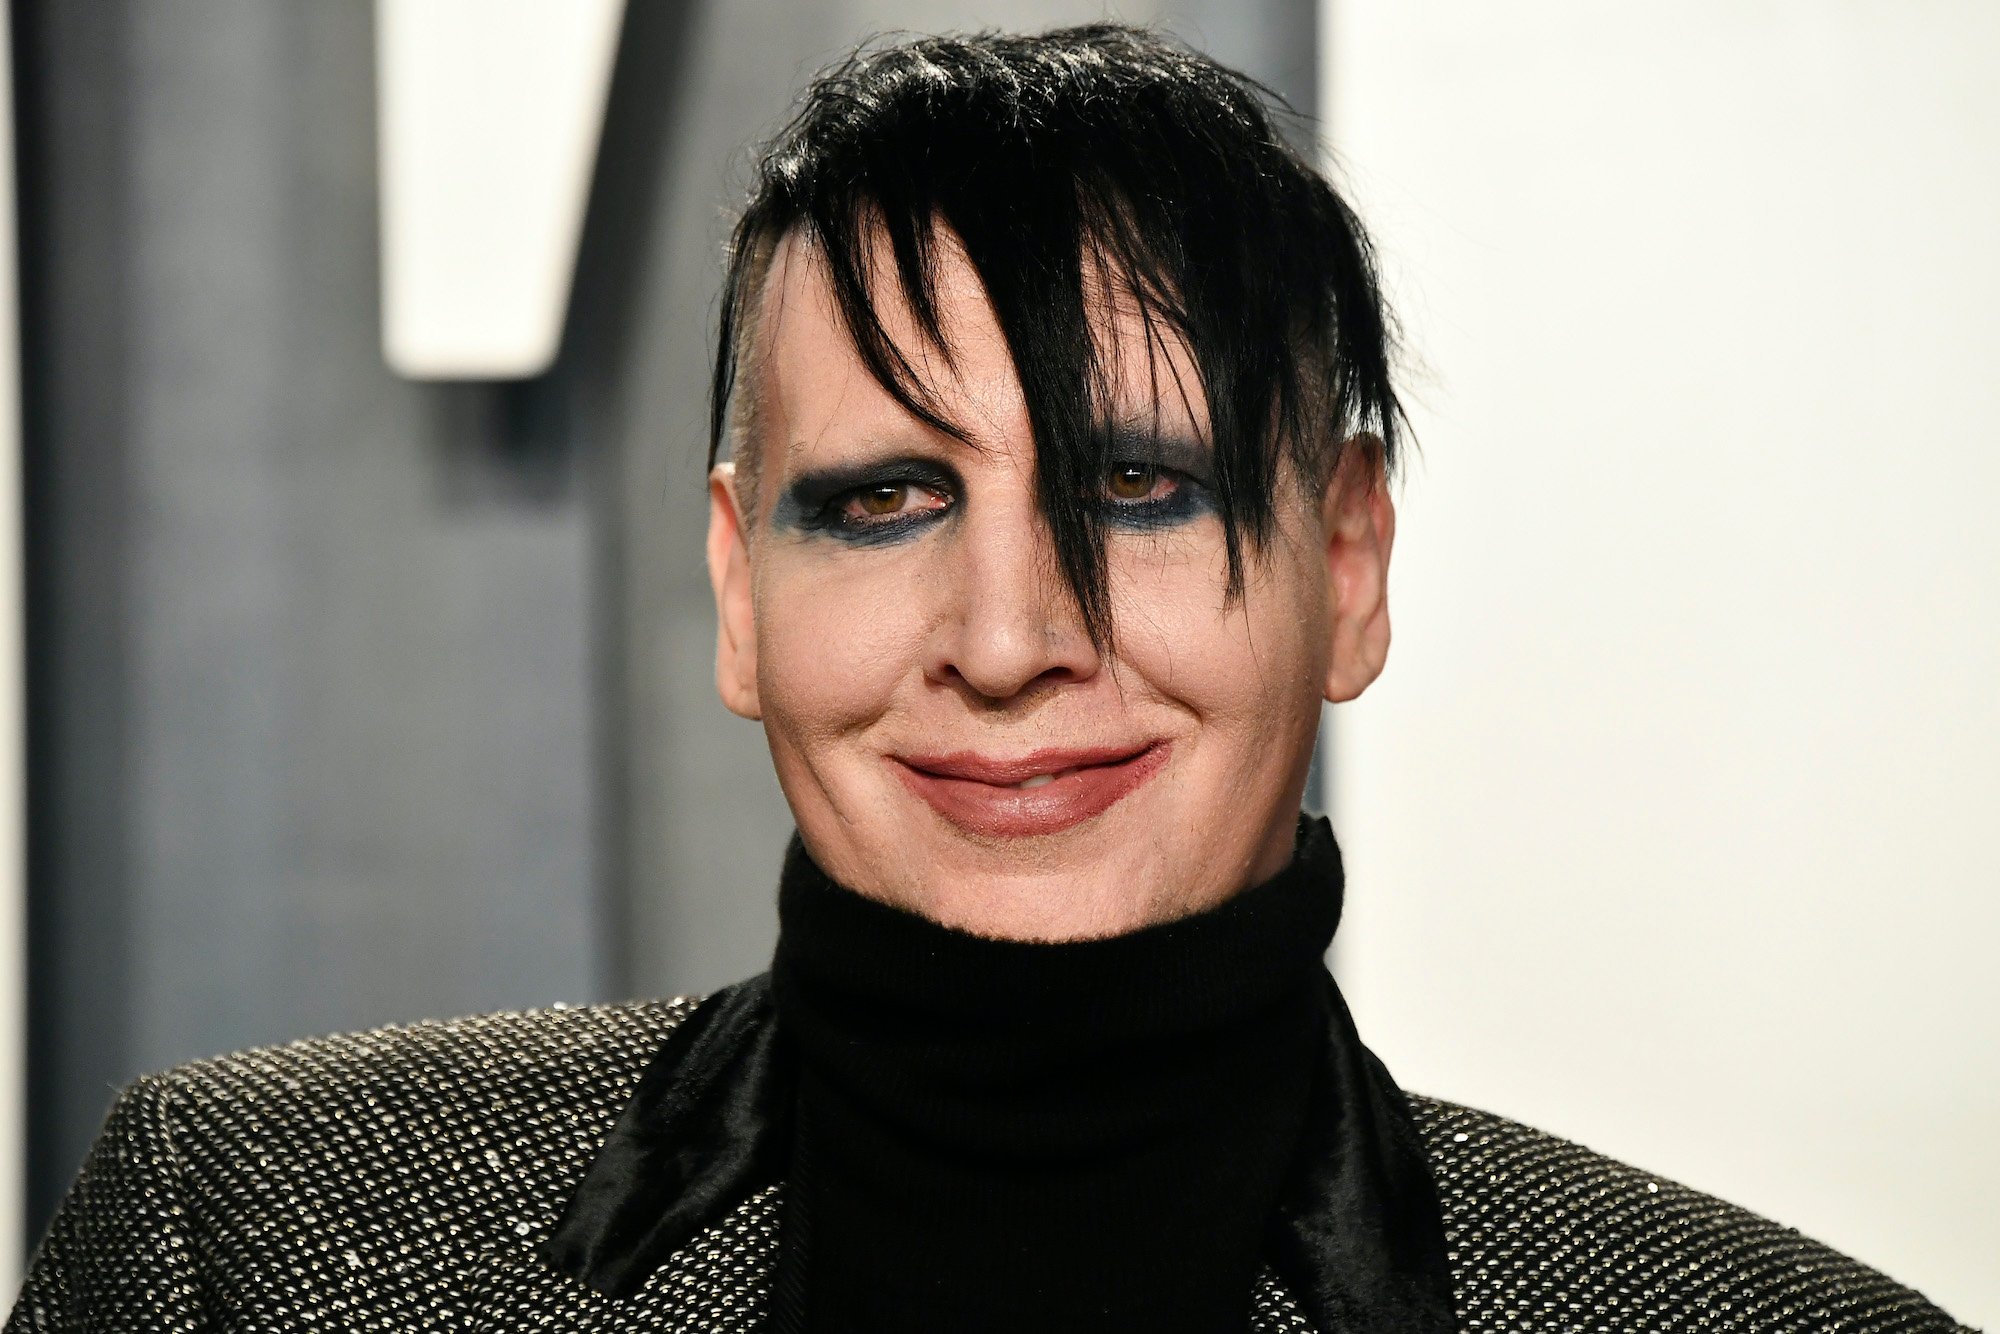 Marilyn Manson smiling in front of a blurred background